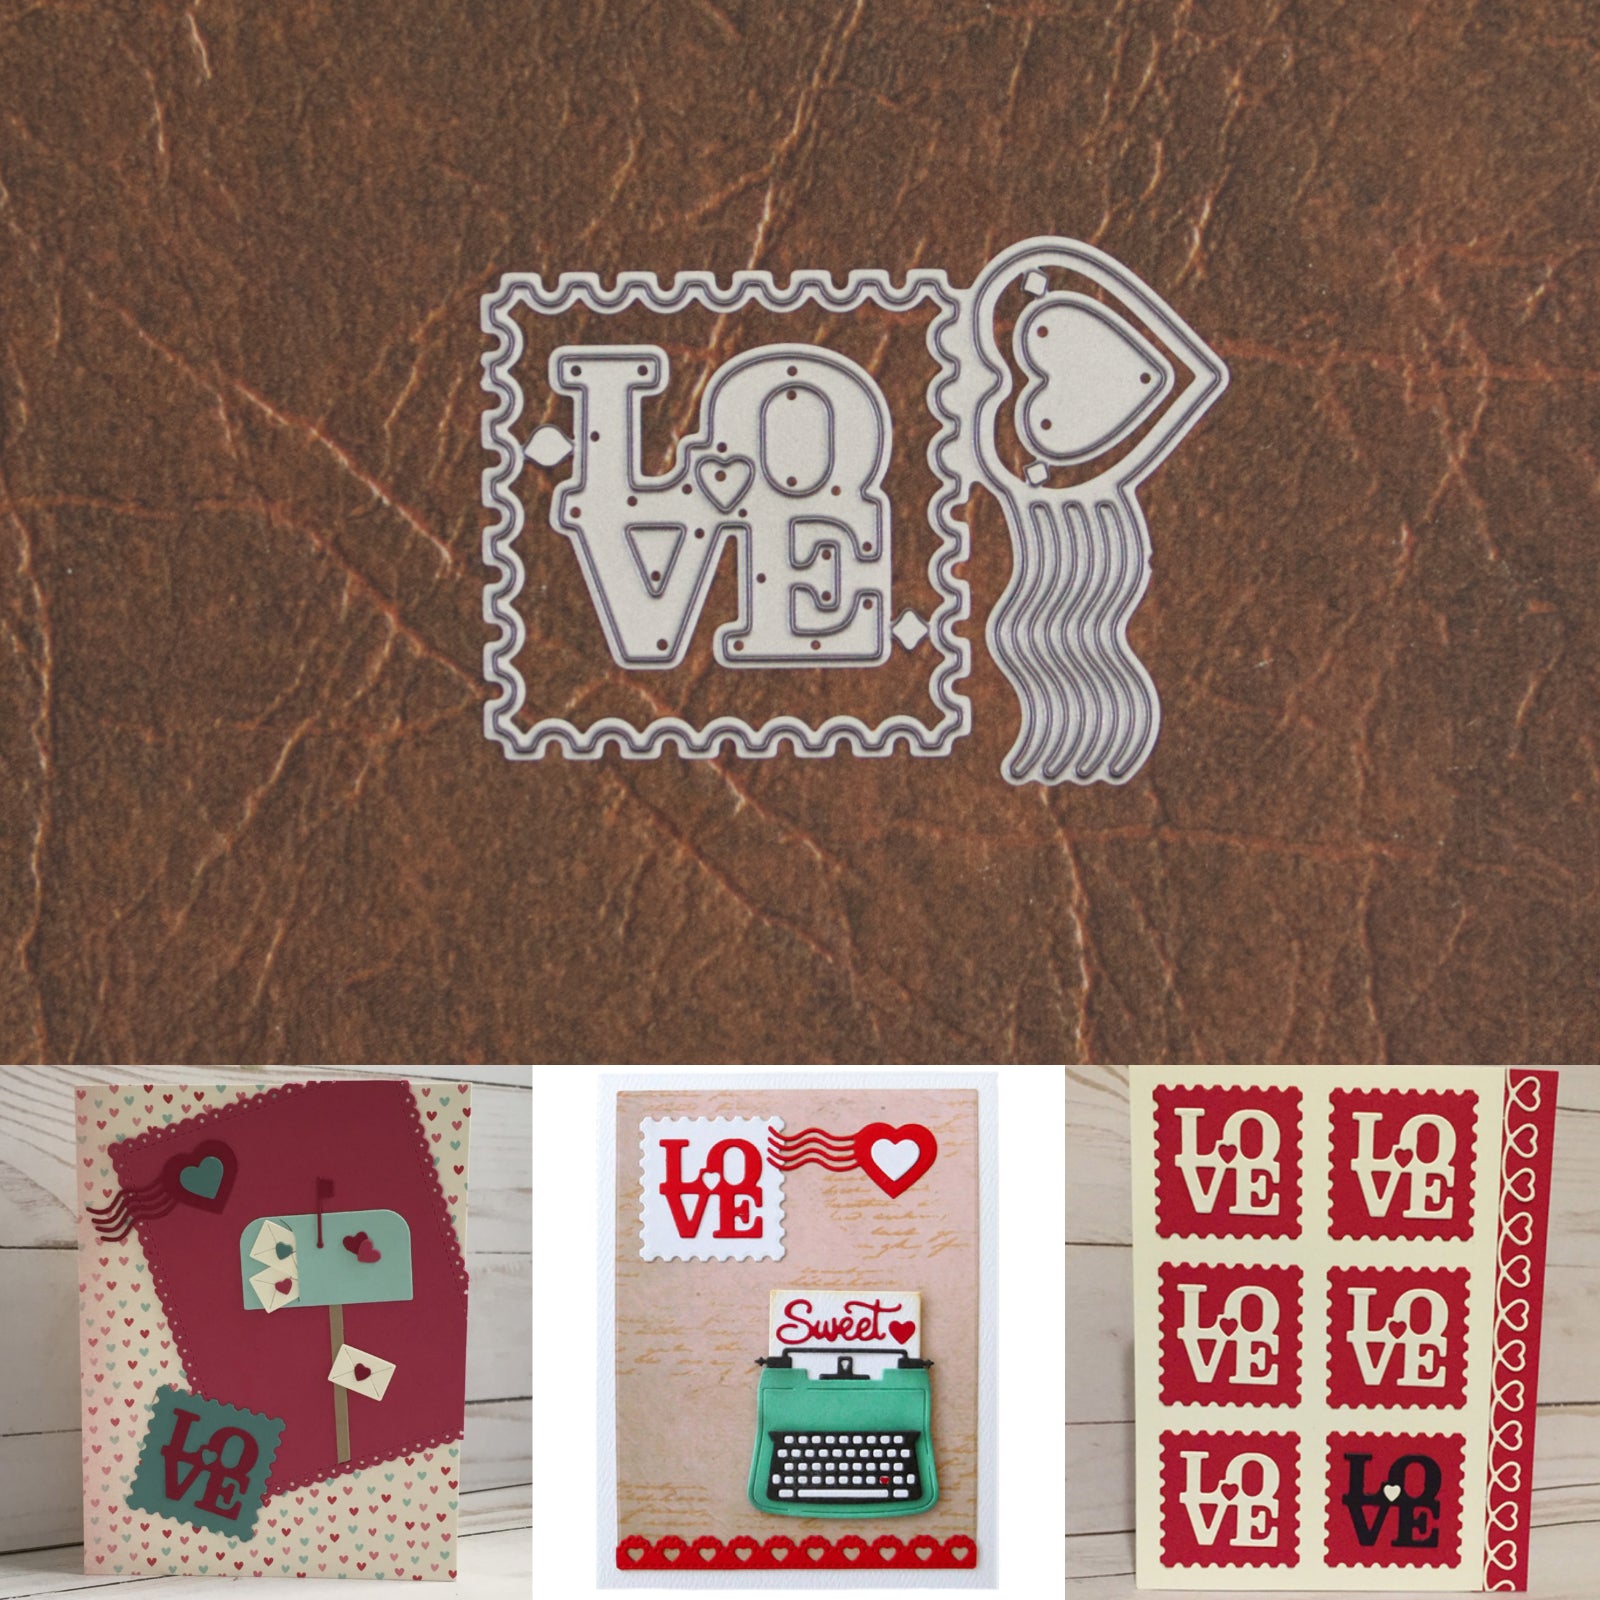 Love Stamp w Heart Postage Mark Cutting & Embossing Dies